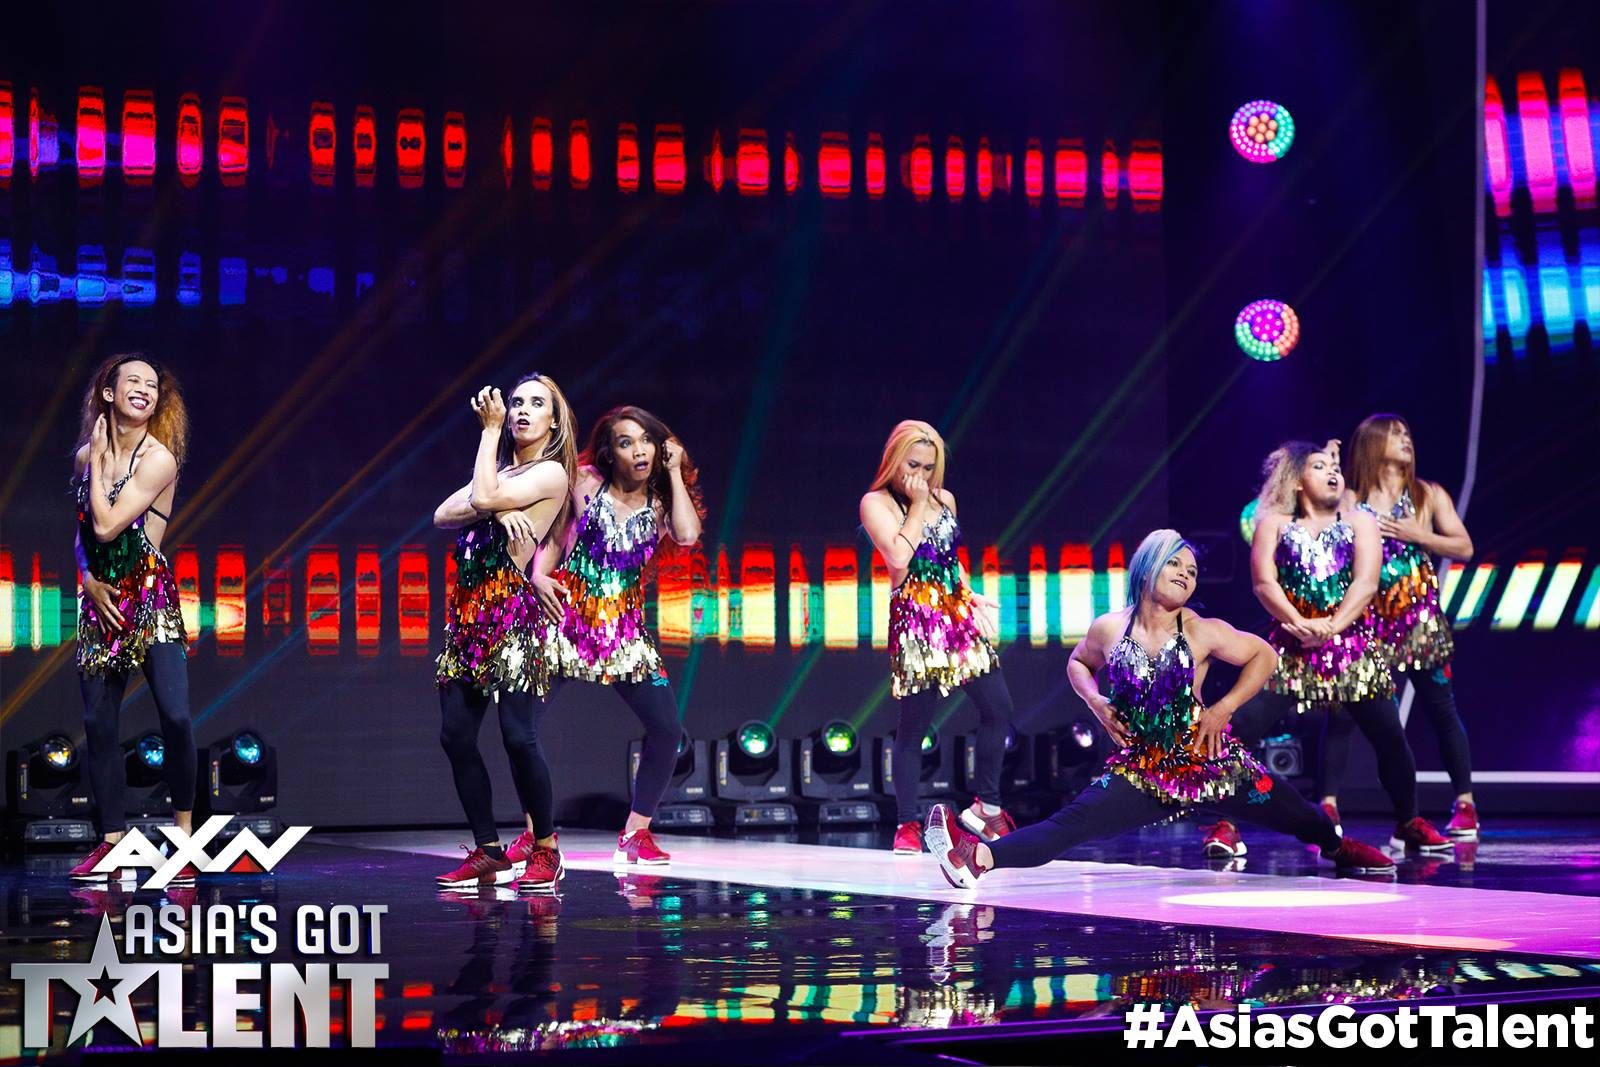 Dance group DM-X Comvalenoz finishes 2nd place in ‘Asia’s Got Talent’ season 2